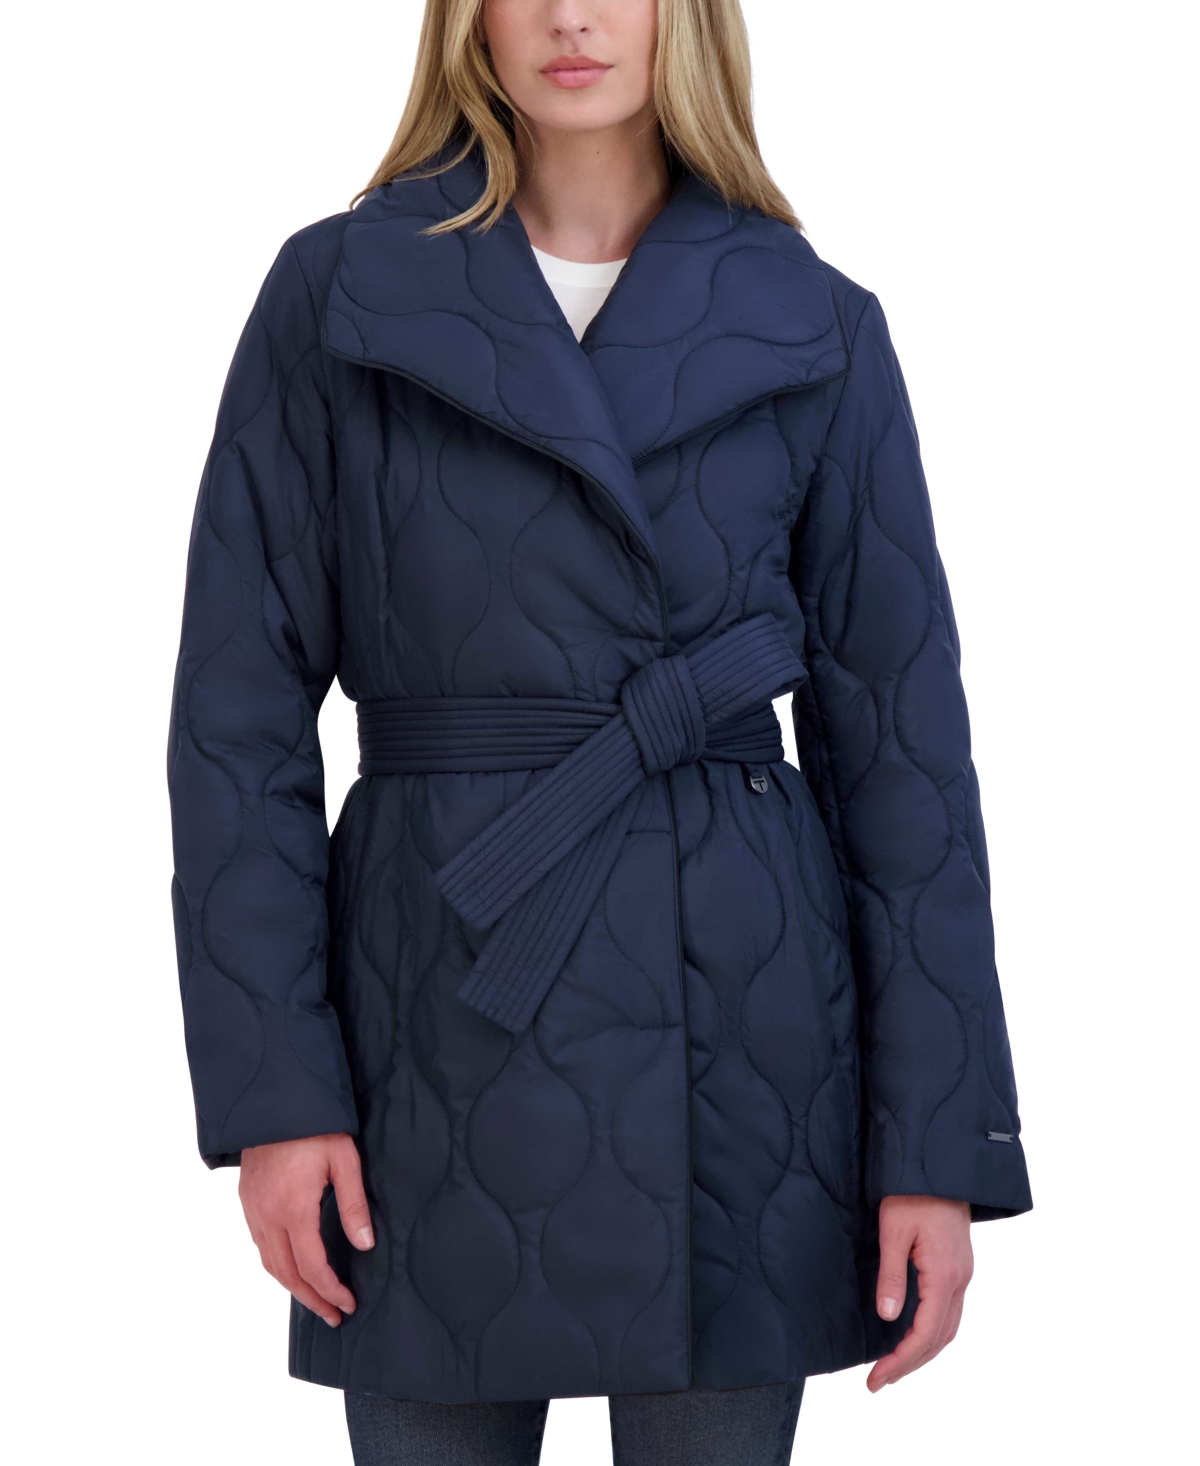 Women's Petite Belted Asymmetric Quilted Coat - Navy